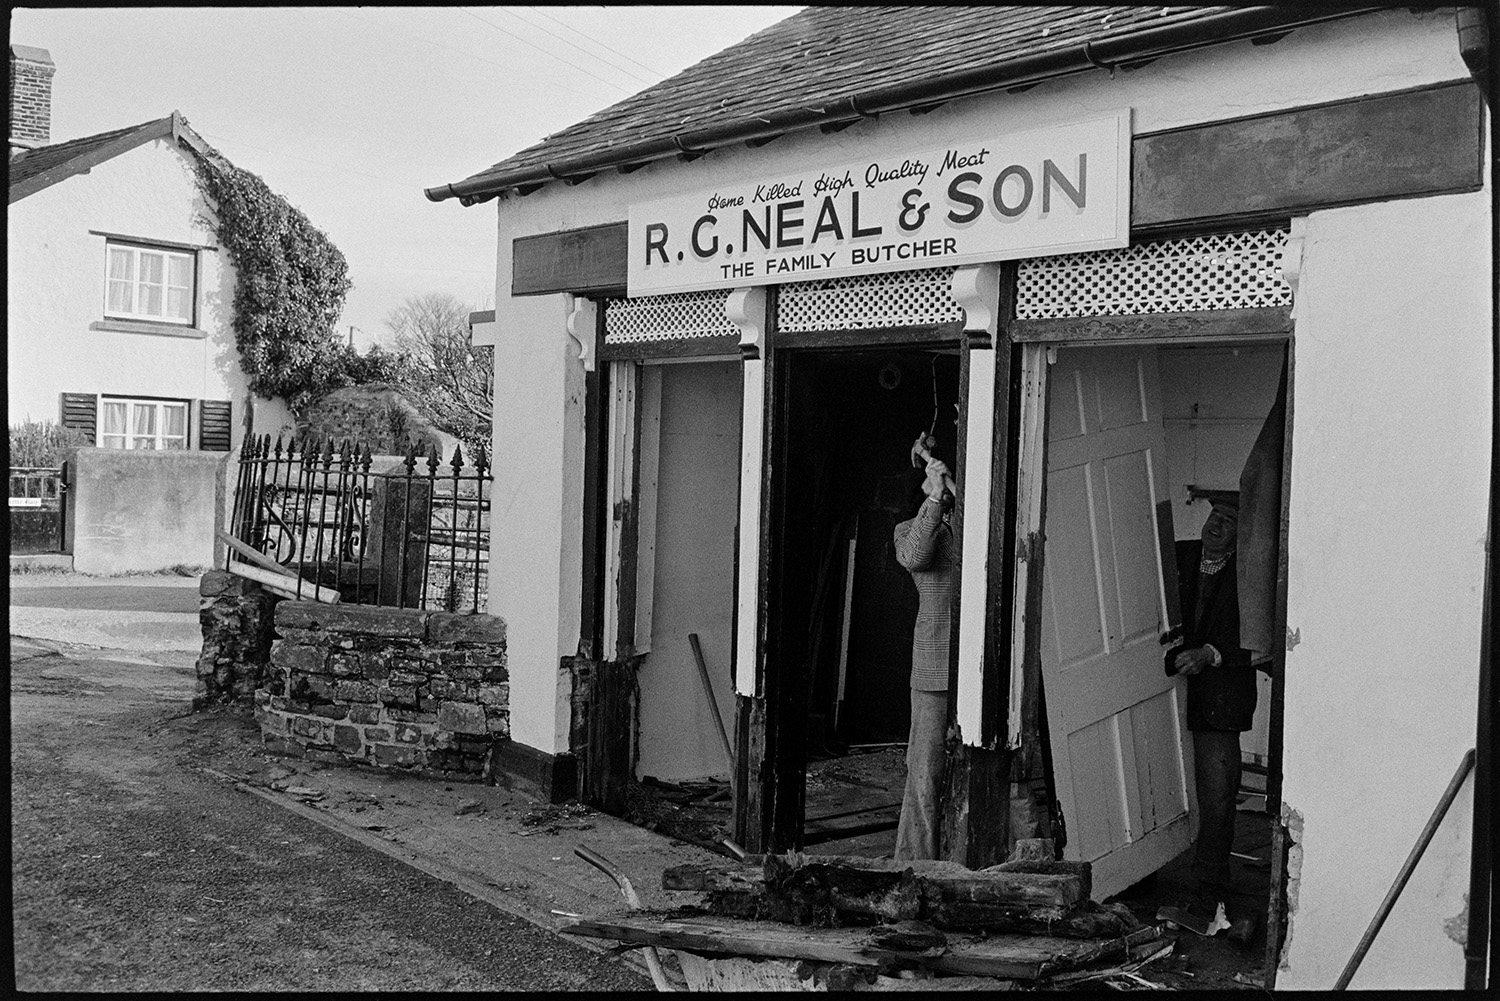 Renovation front of butchers shop. 
[A man knocking down the front of R G Neal & Son butcher's shop in Dolton, before refurbishing it. The sign is above the shop.]